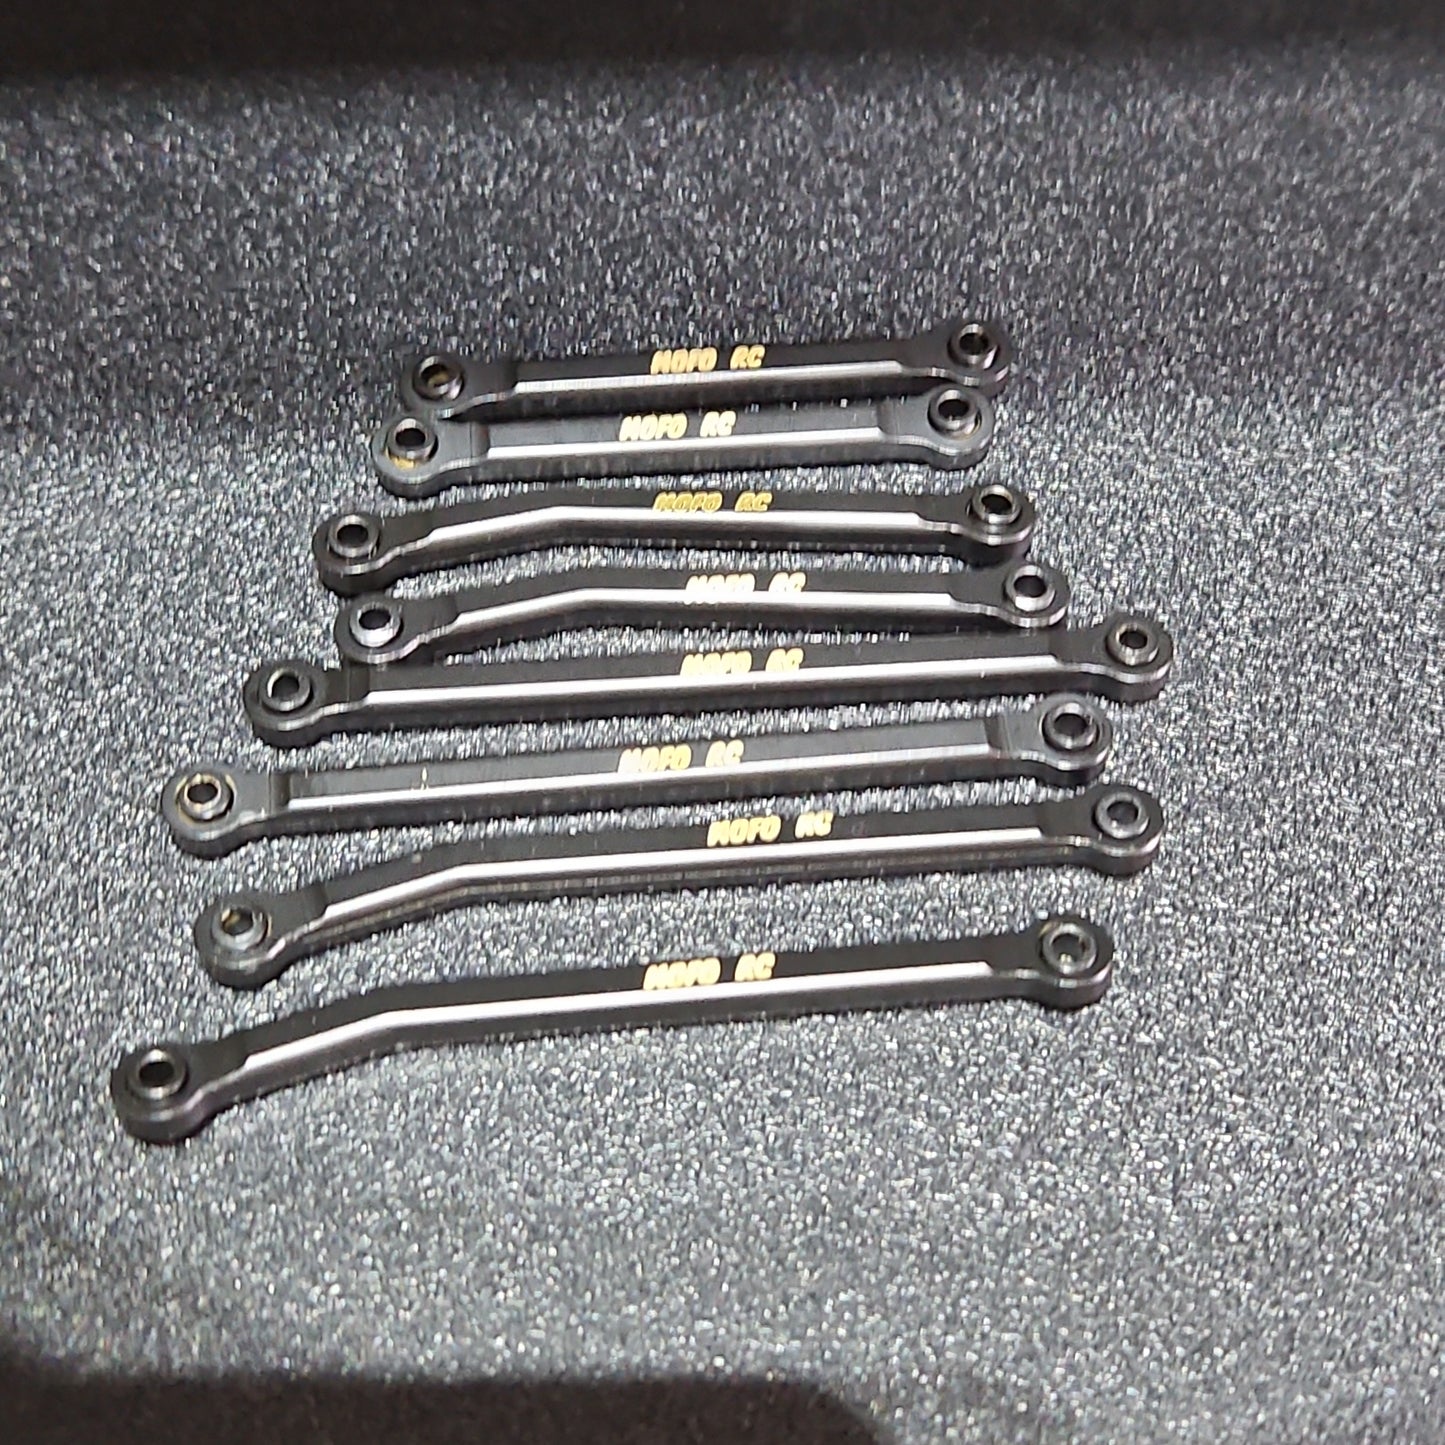 Black Brass High Clearance 4 link kit for Trx4-m